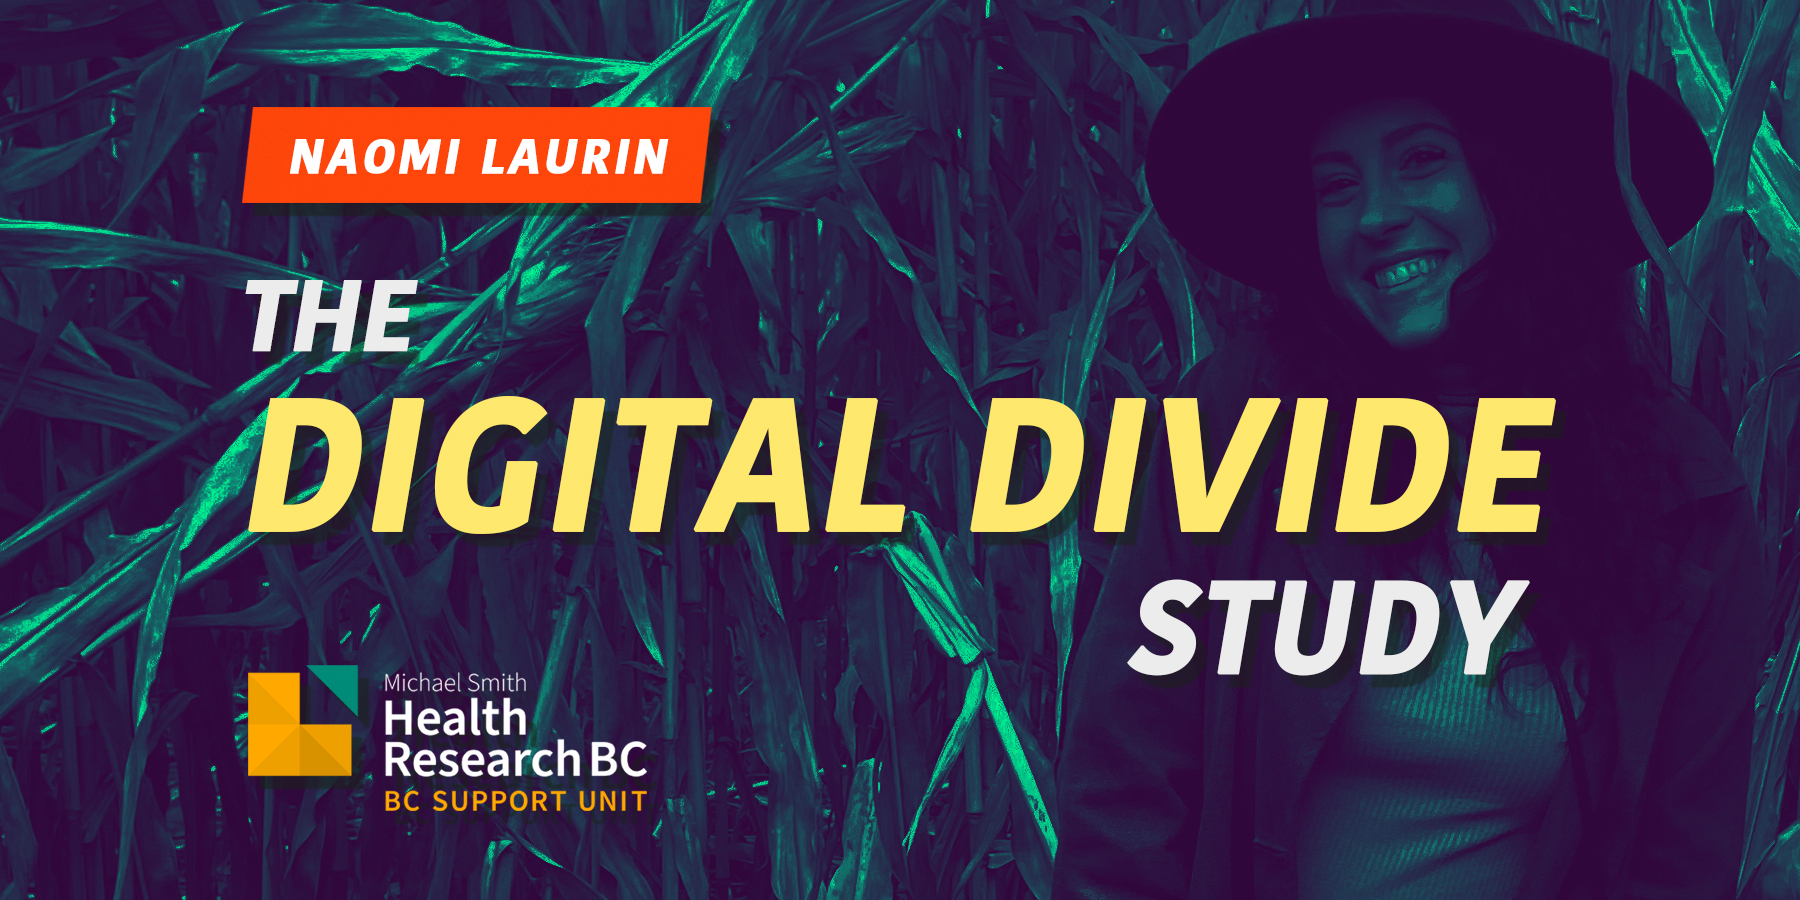 The Digital Divide Study: My First Experience Working on Qualitative Research